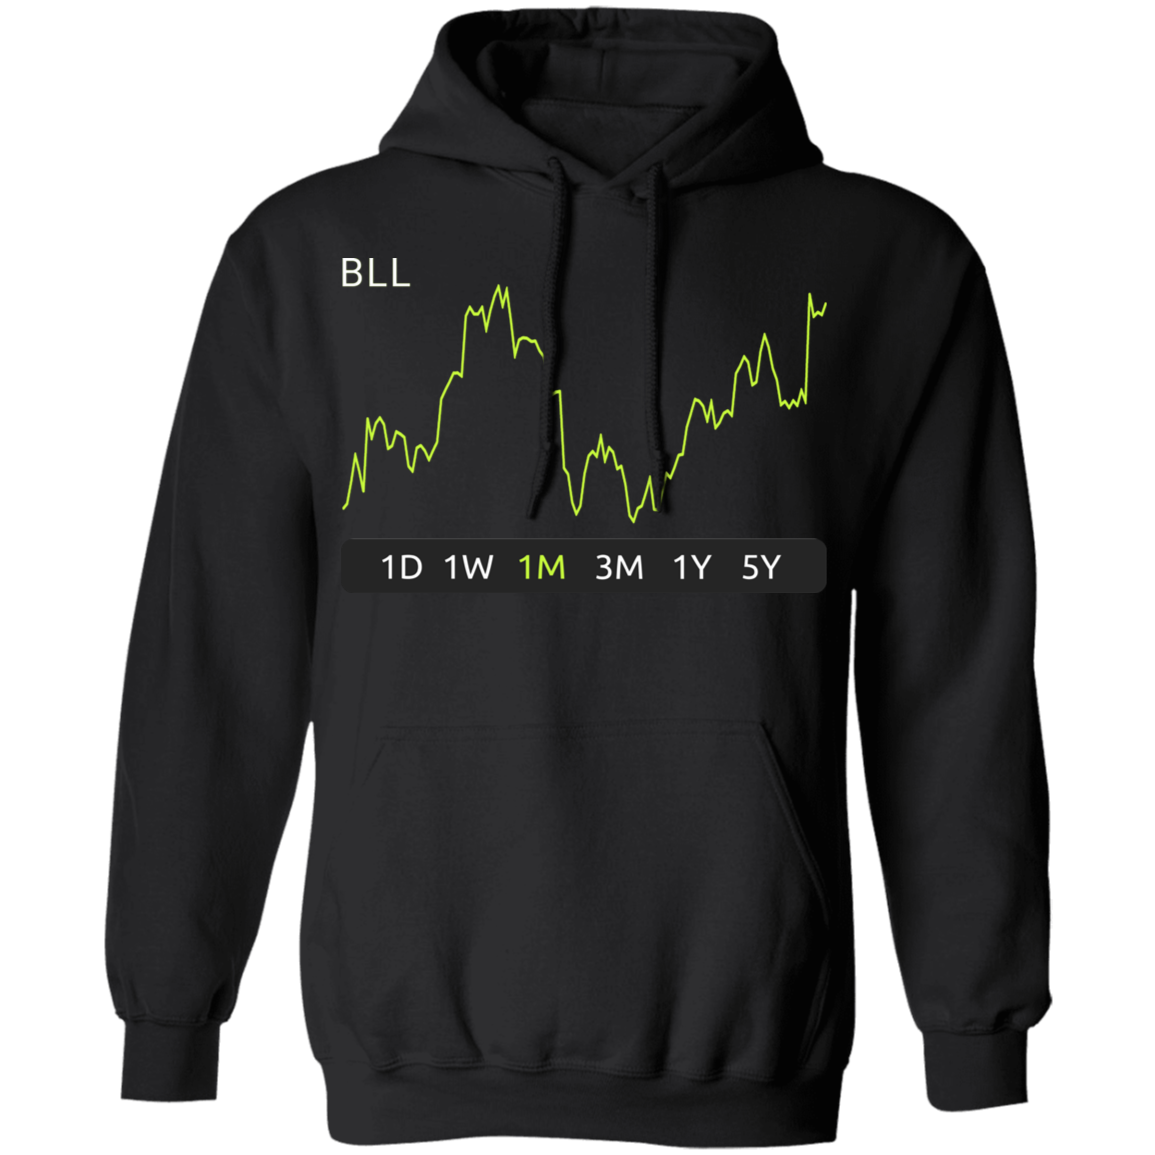 BLL Stock 1m Pullover Hoodie